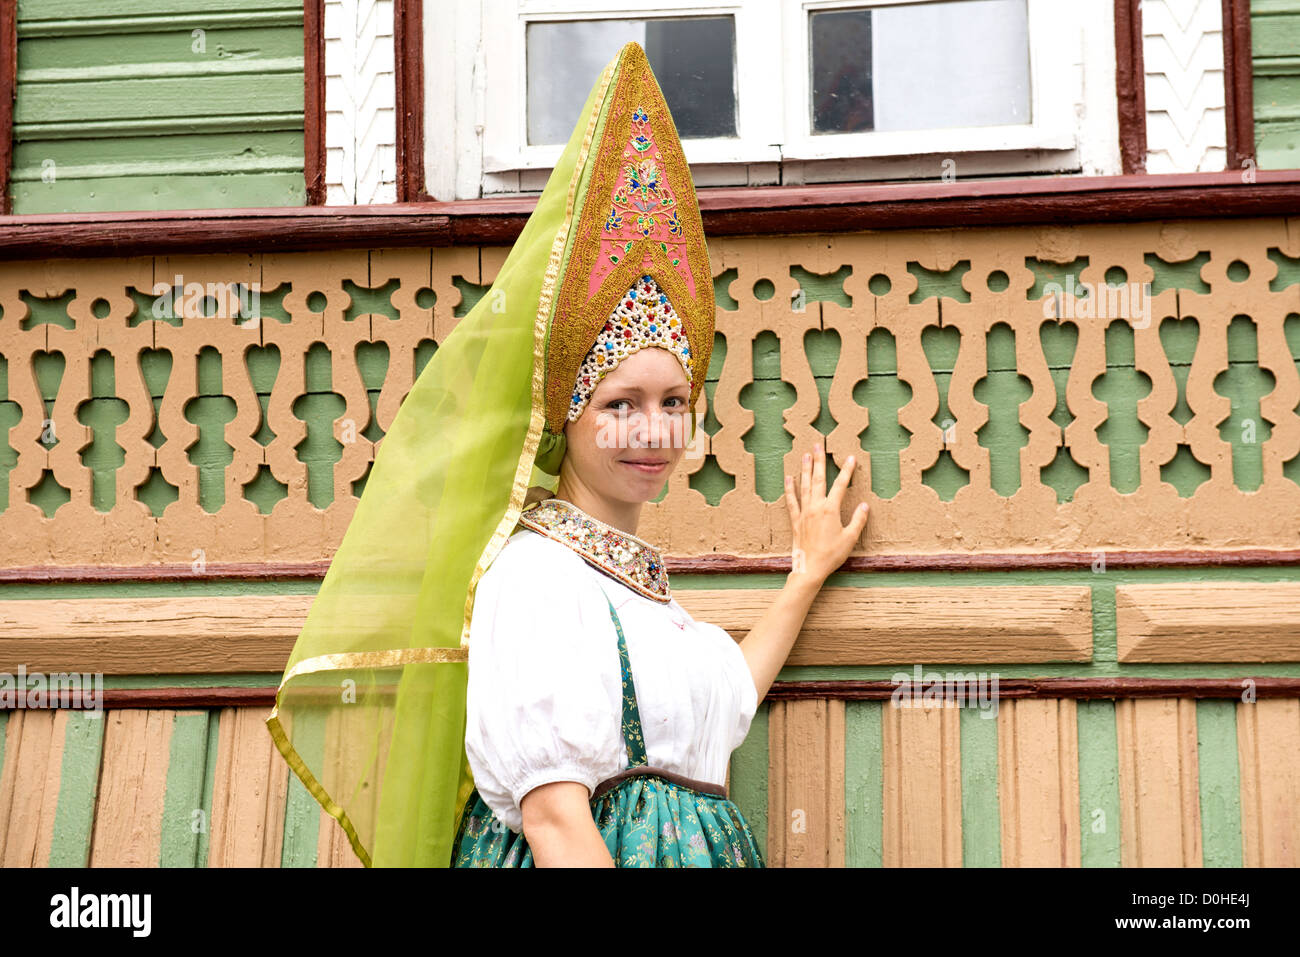 Girl In Russian Traditional Clothing Stock Photo, Picture and